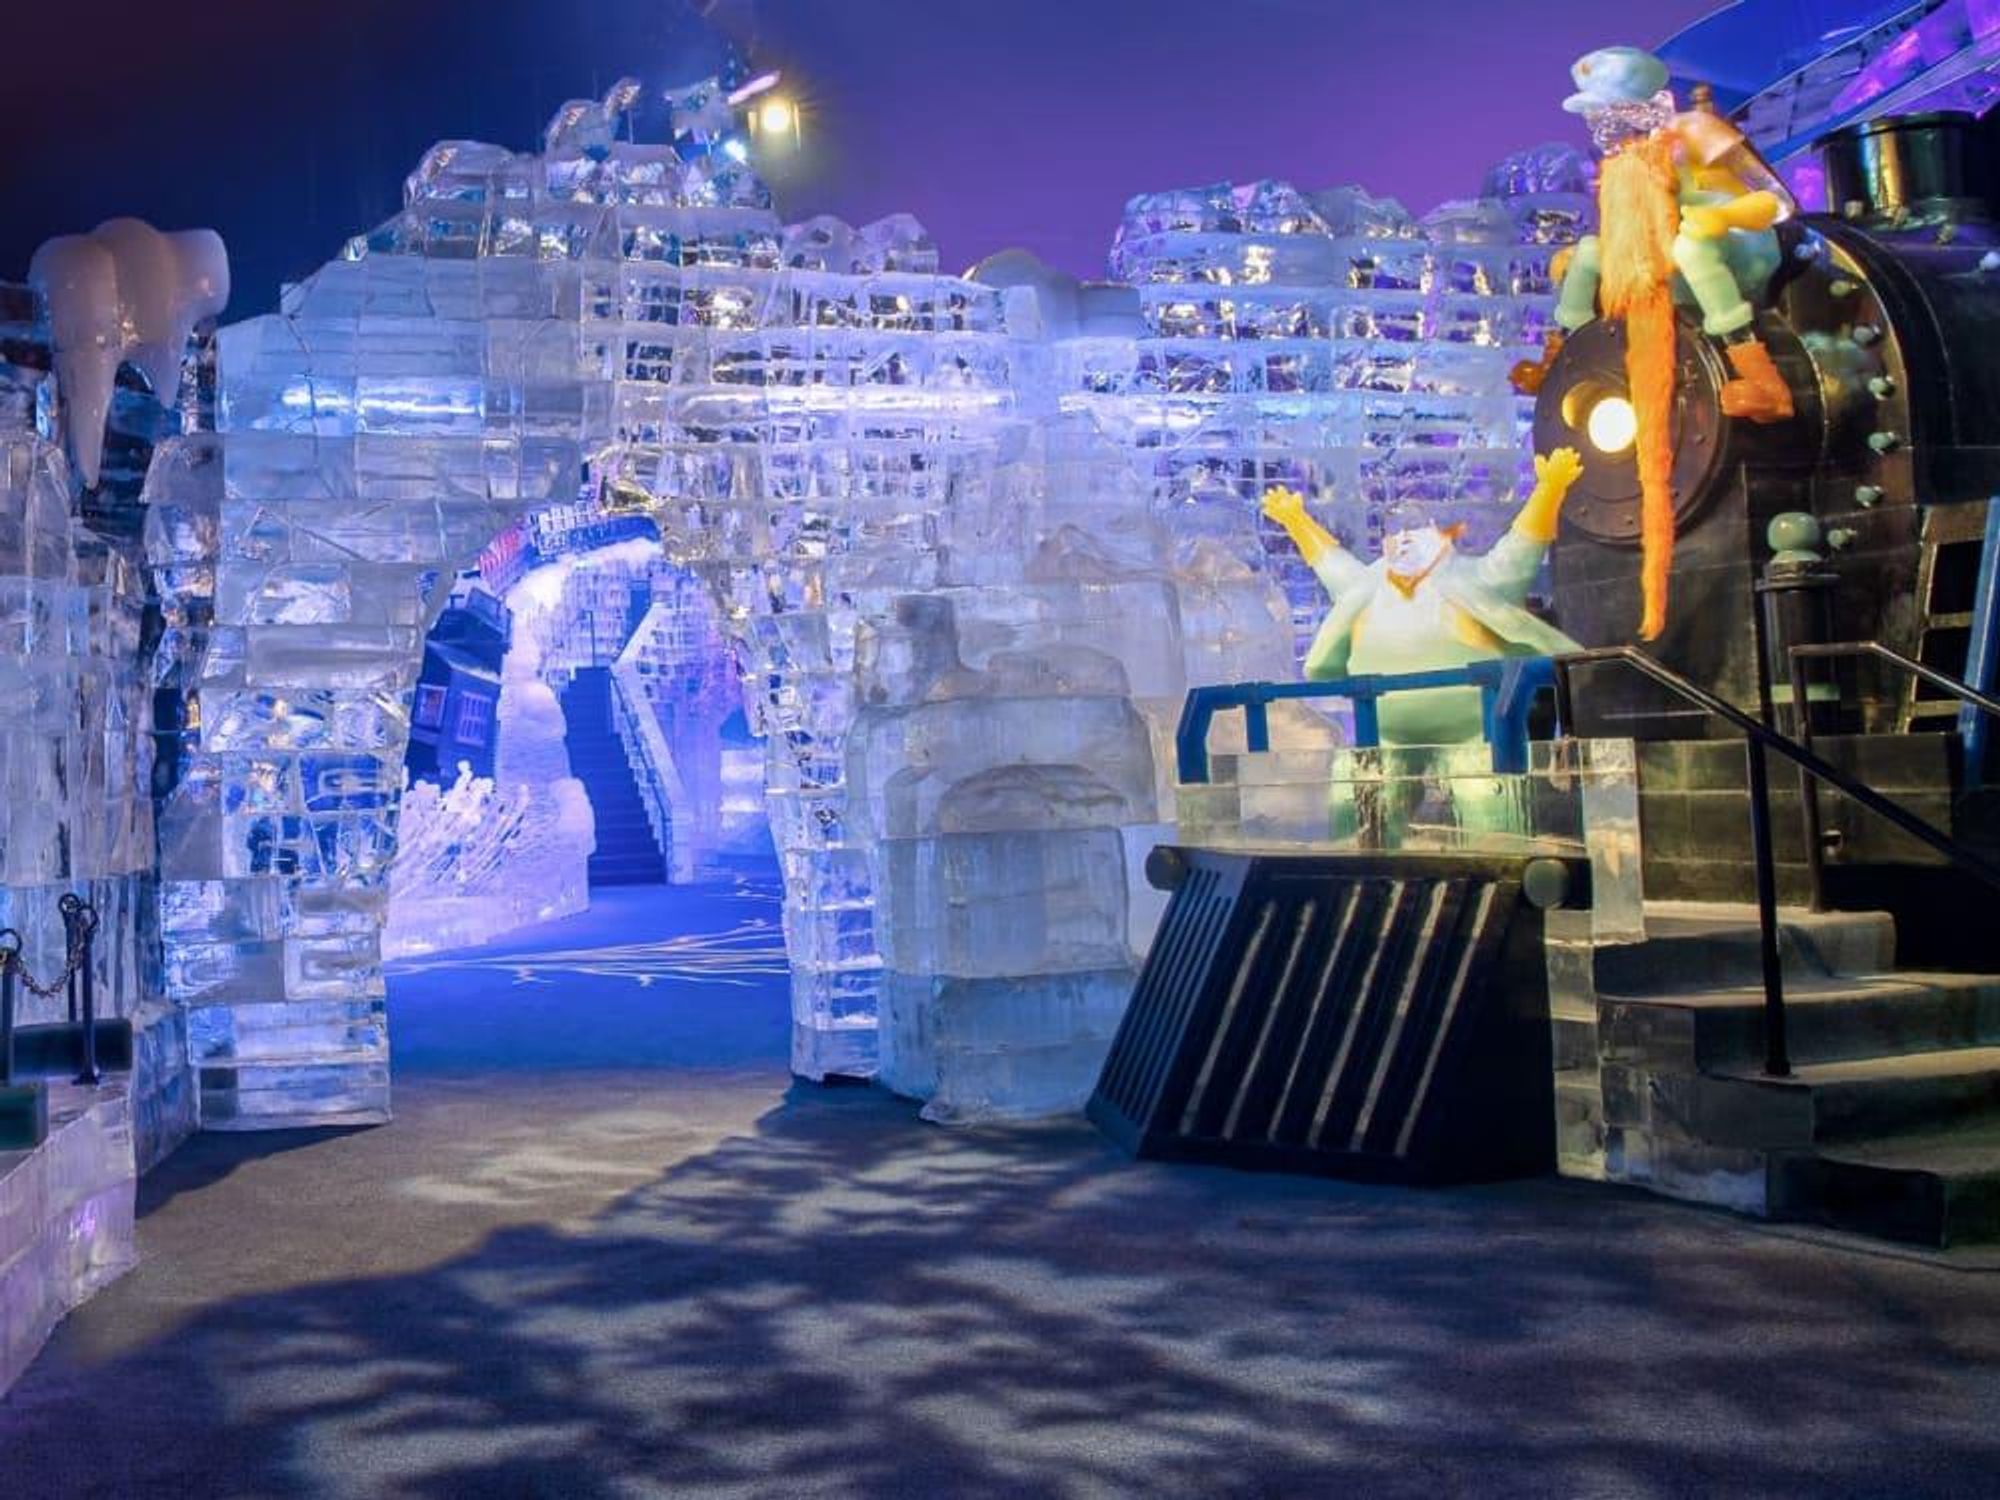 ICE! holiday sensation returns to Gaylord Texan Grapevine after 2-year  freeze out - CultureMap Fort Worth